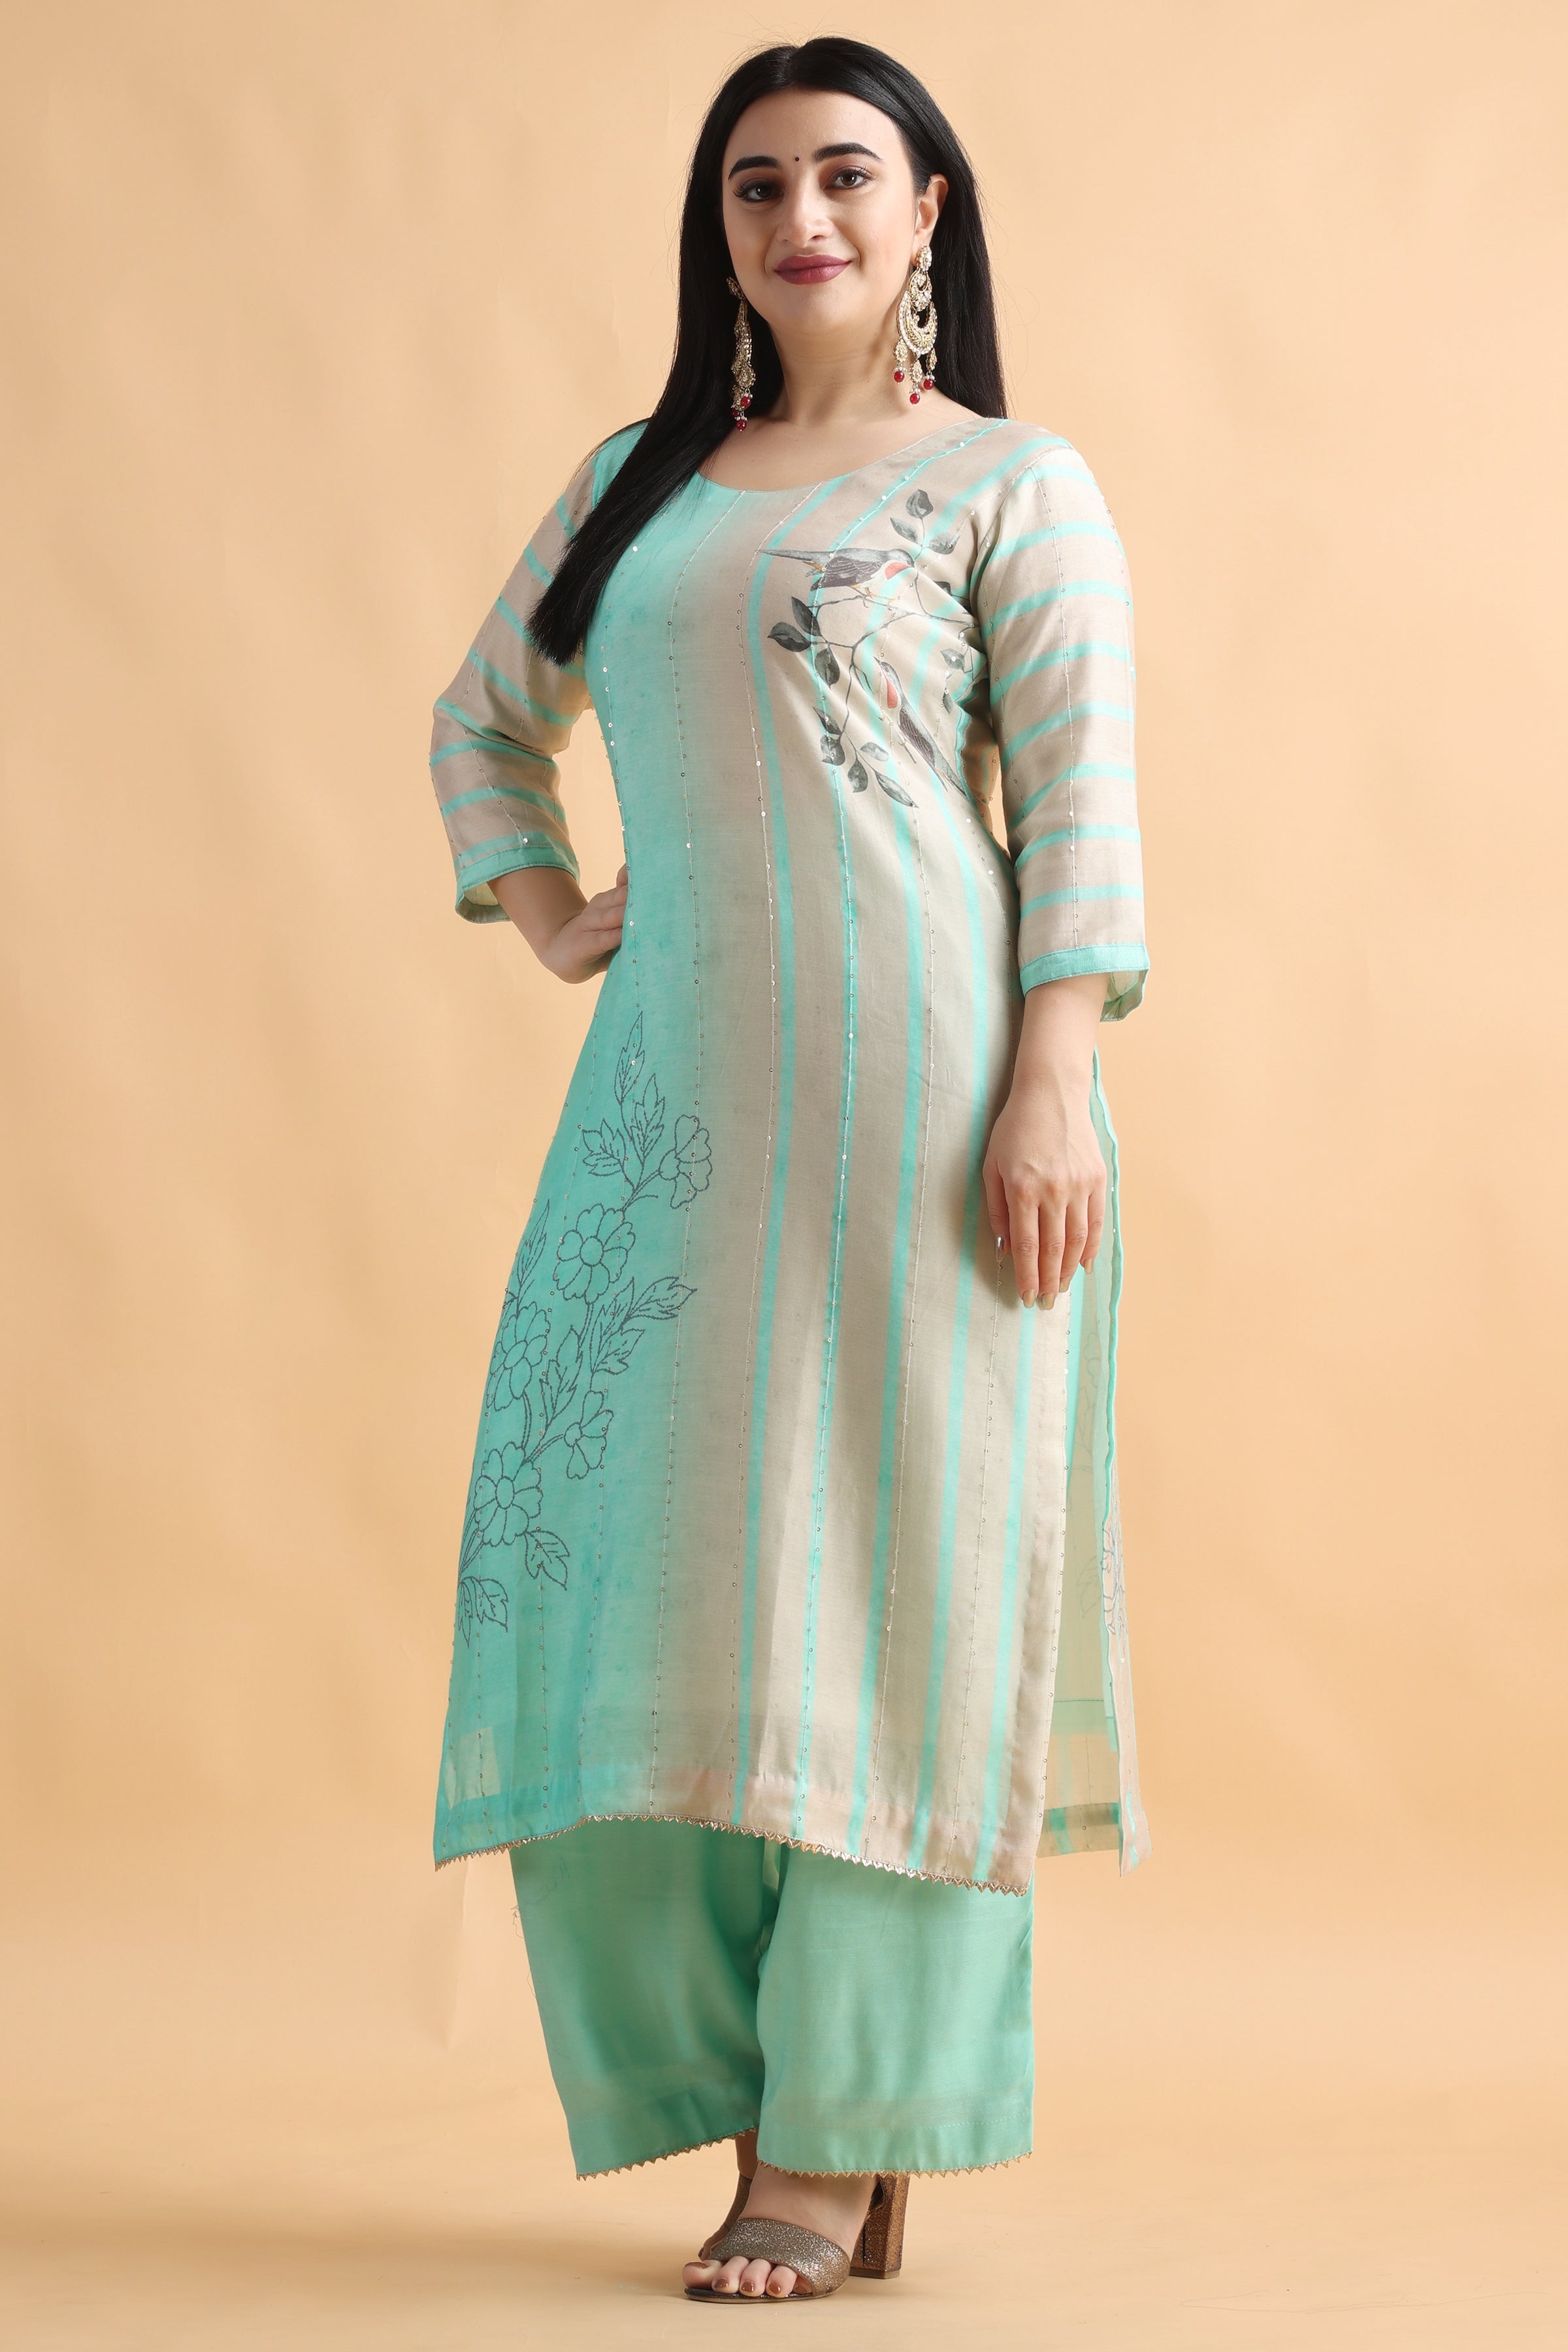 Unstitched Women Clothing Online Shopping in Pakistan | Clothes for women, Online  womens clothing, Suits for women